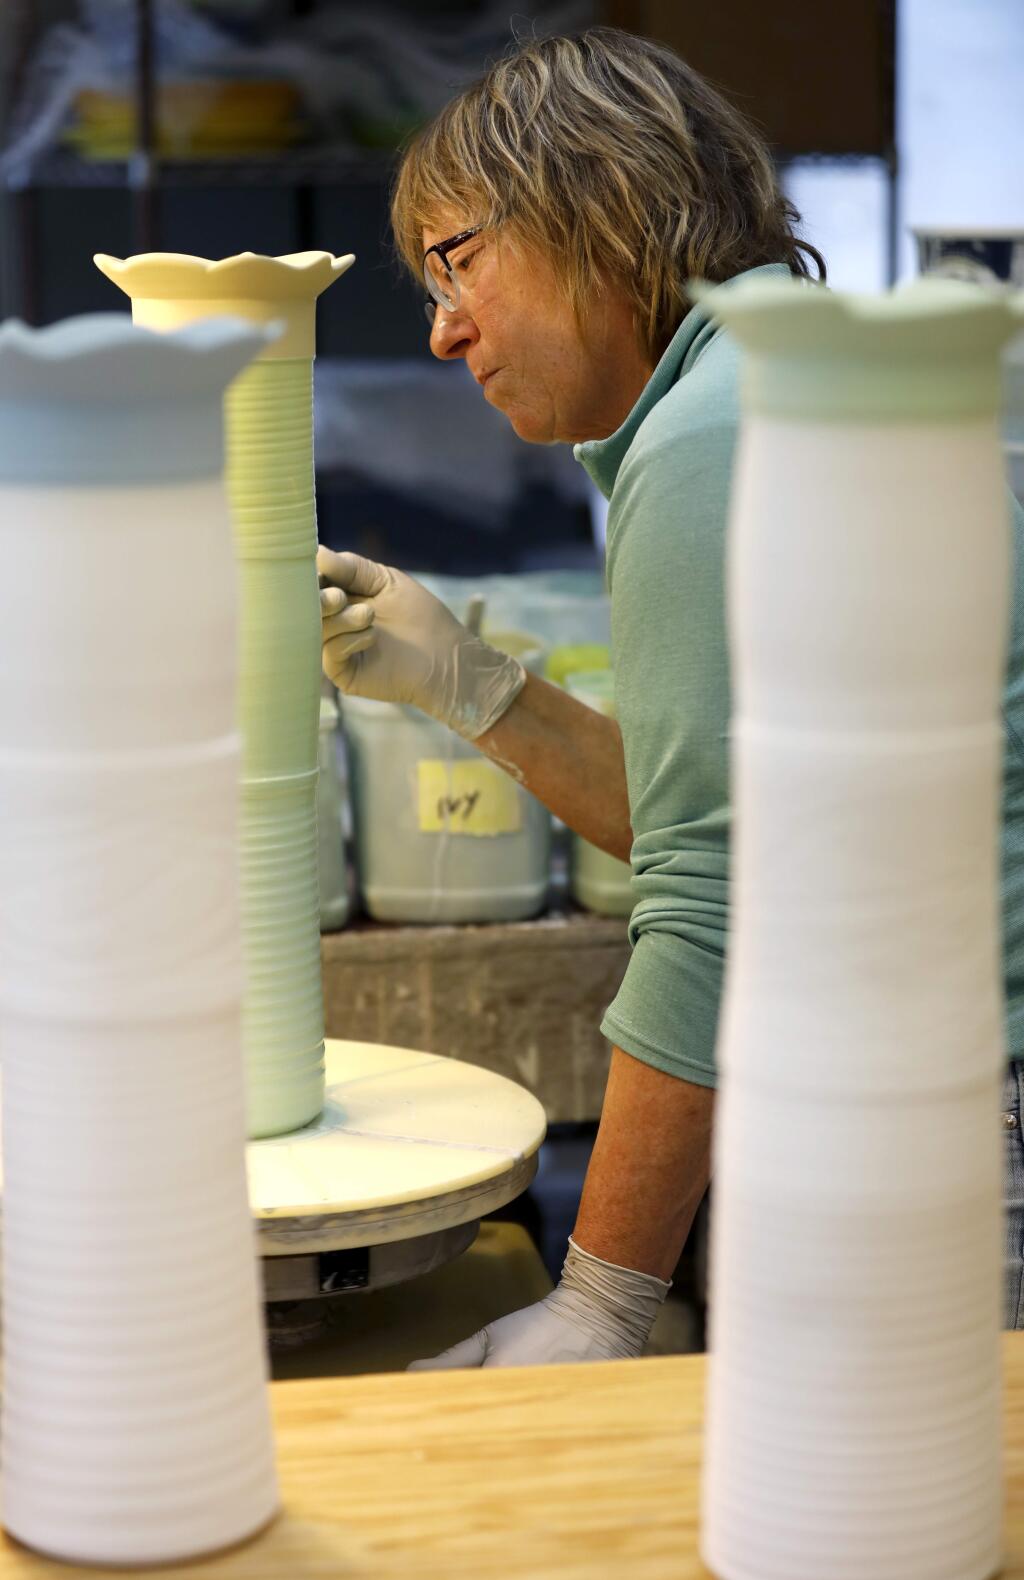 Potter Marge Margulies glazes a pot at her studio in Guerneville on Monday, May 6, 2019. (BETH SCHLANKER/PD)